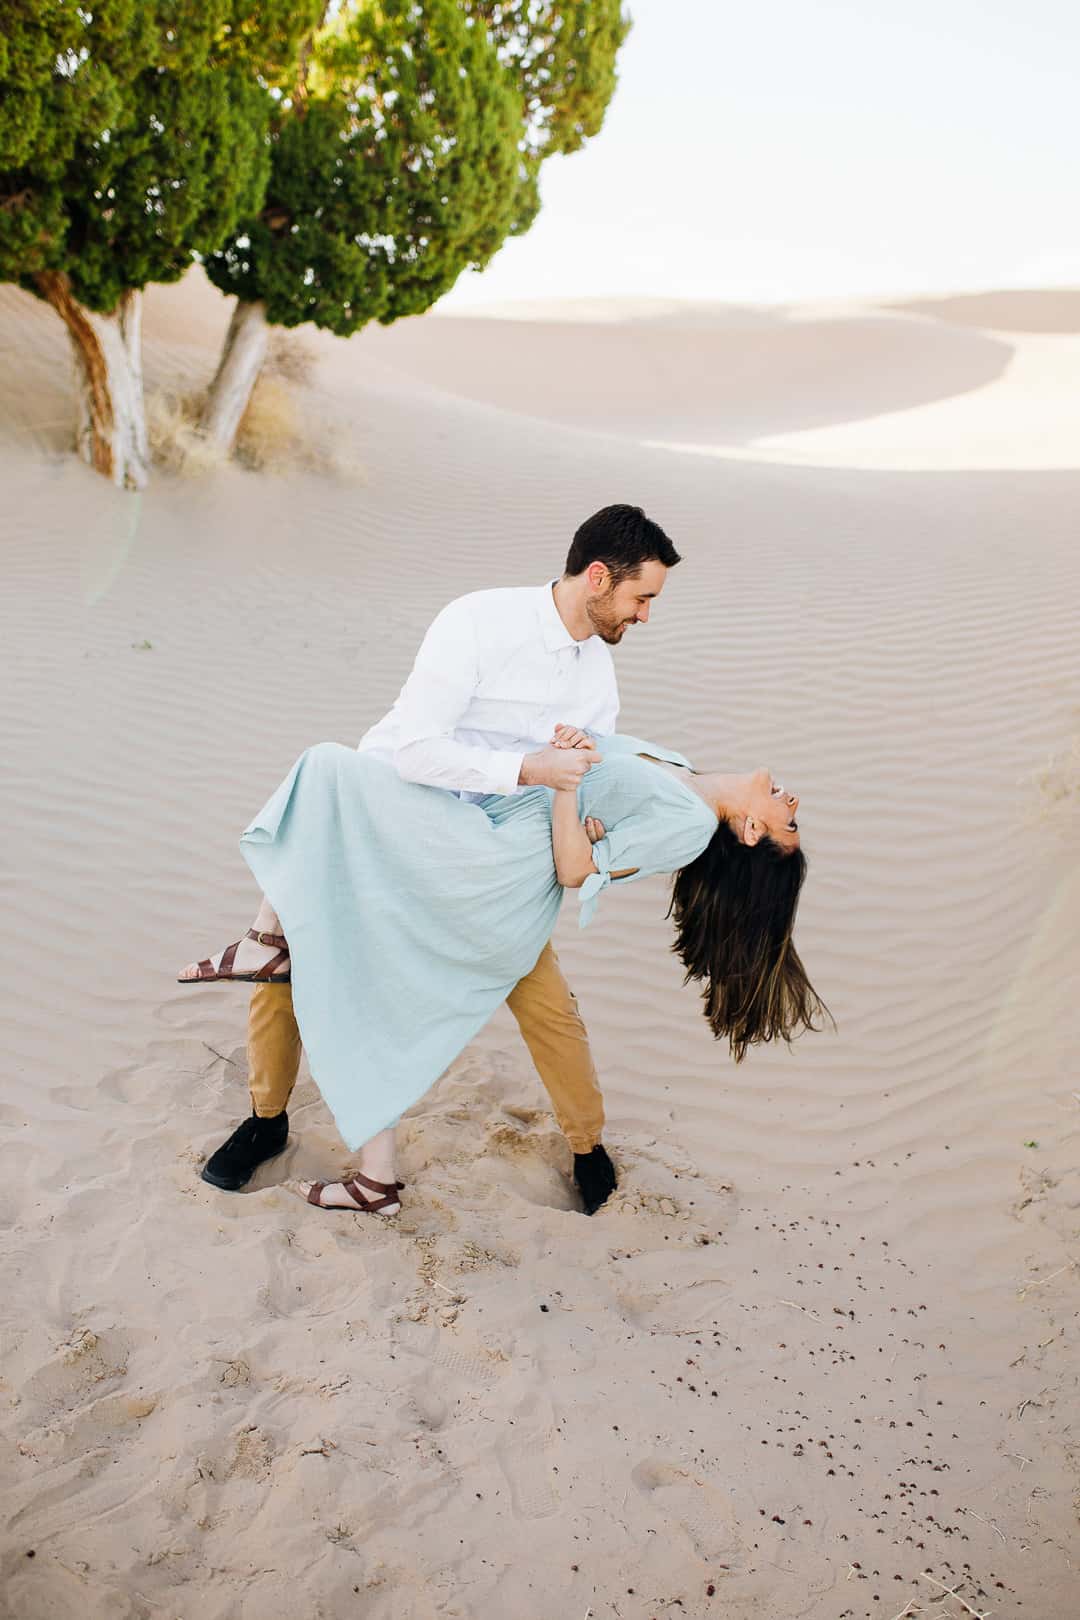 Flowing blue dress in the sand engagements